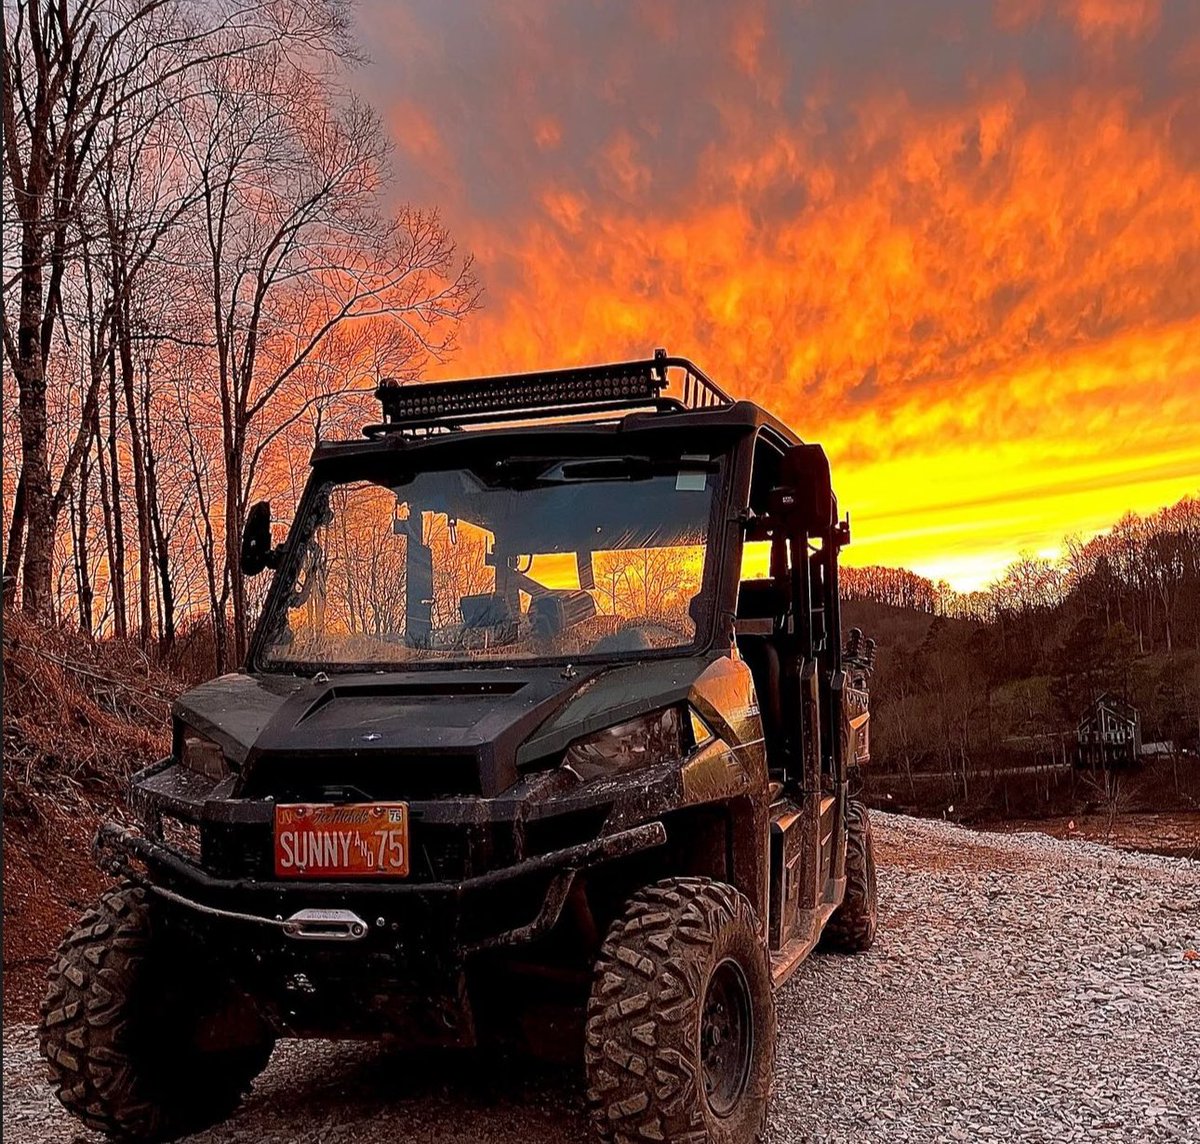 Getting ready for warmer weather! Who’s ready for it to be Sunny and 75? If you have one of the personalized license plates, let’s see it. This one is of a beautiful Tennessee sunset. 📸 by Landen Henson